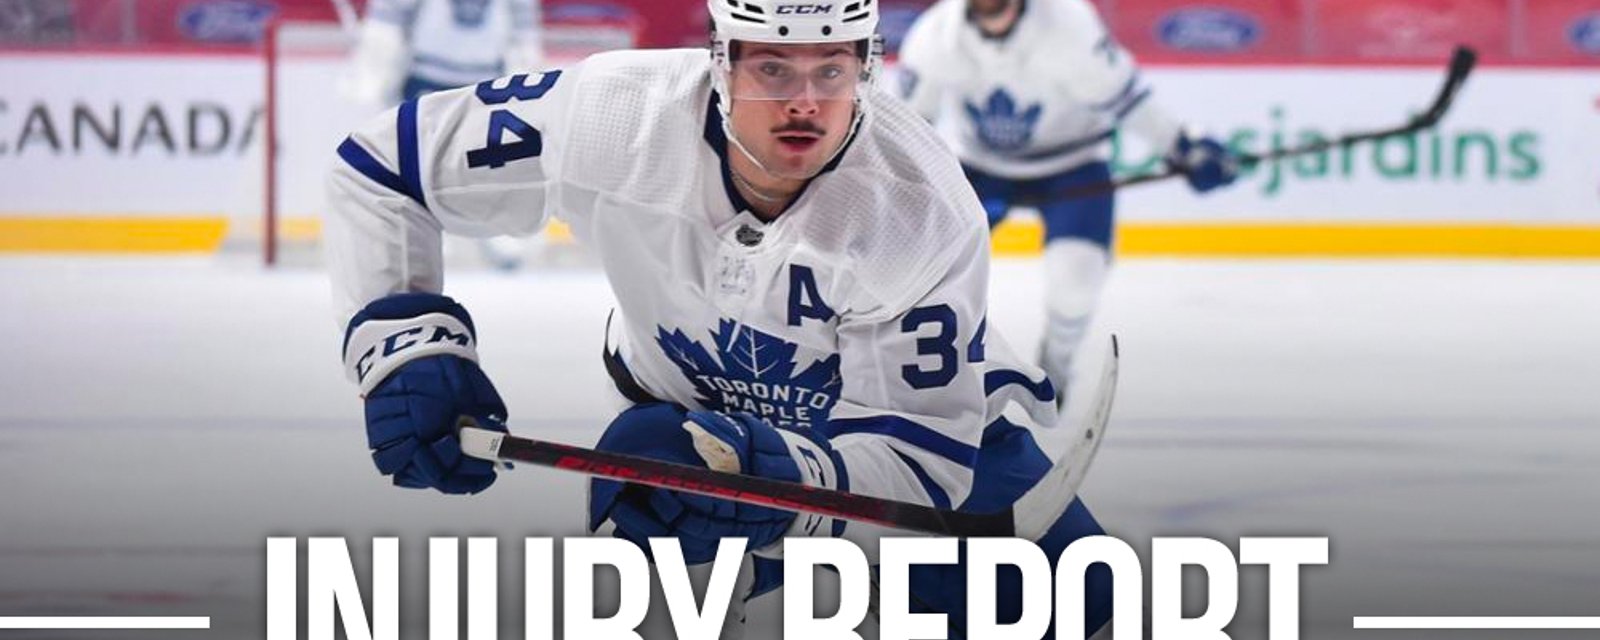 Report: Matthews “not close” to recovering from wrist injury